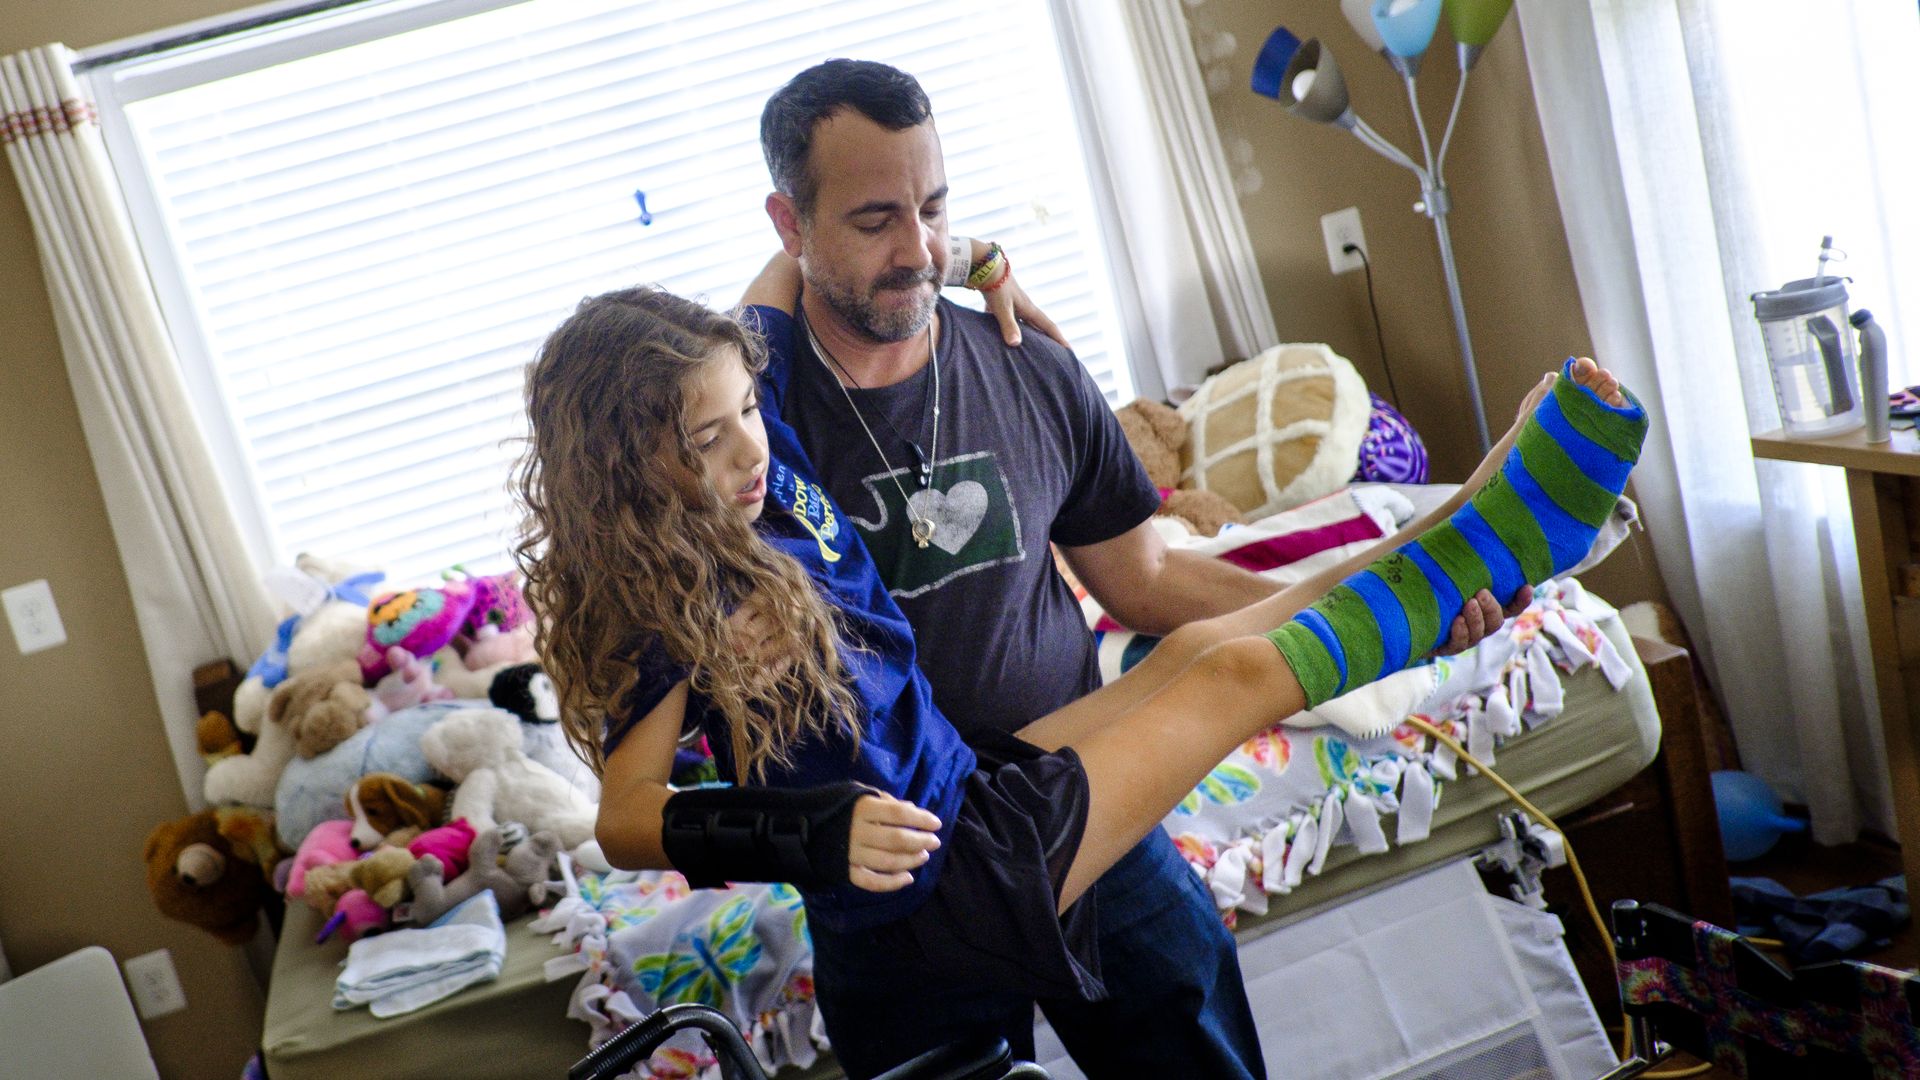 A father carries his daughter, who has a cast, in her hospital room.